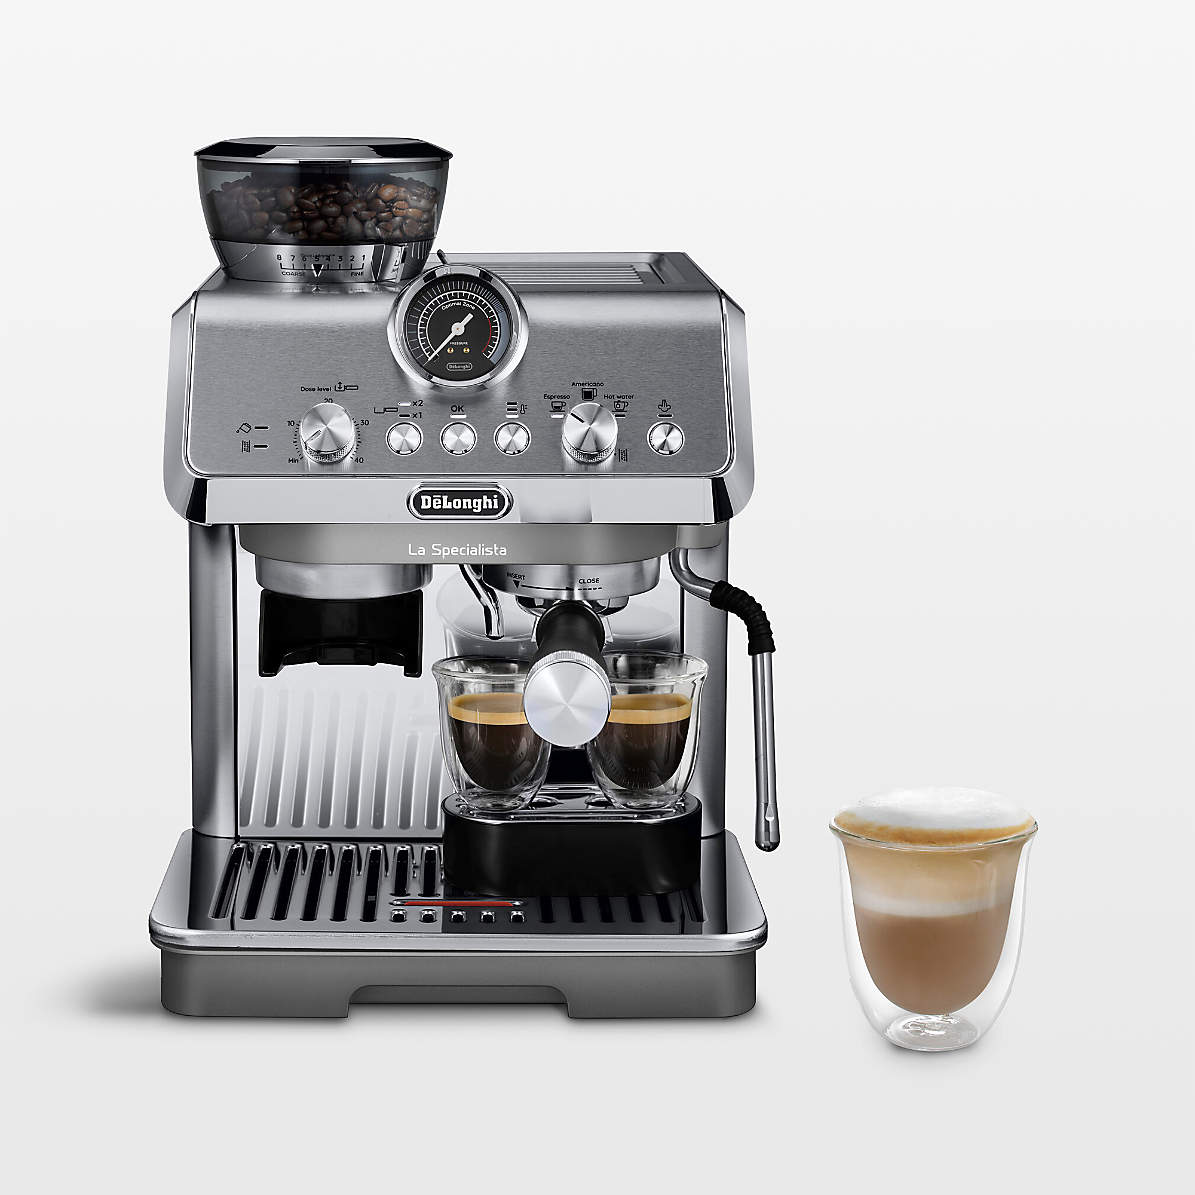 Contaminated Besides Ready De'Longhi La Specialista Arte Stainless Steel Espresso Machine with Grinder  + Reviews | Crate & Barrel